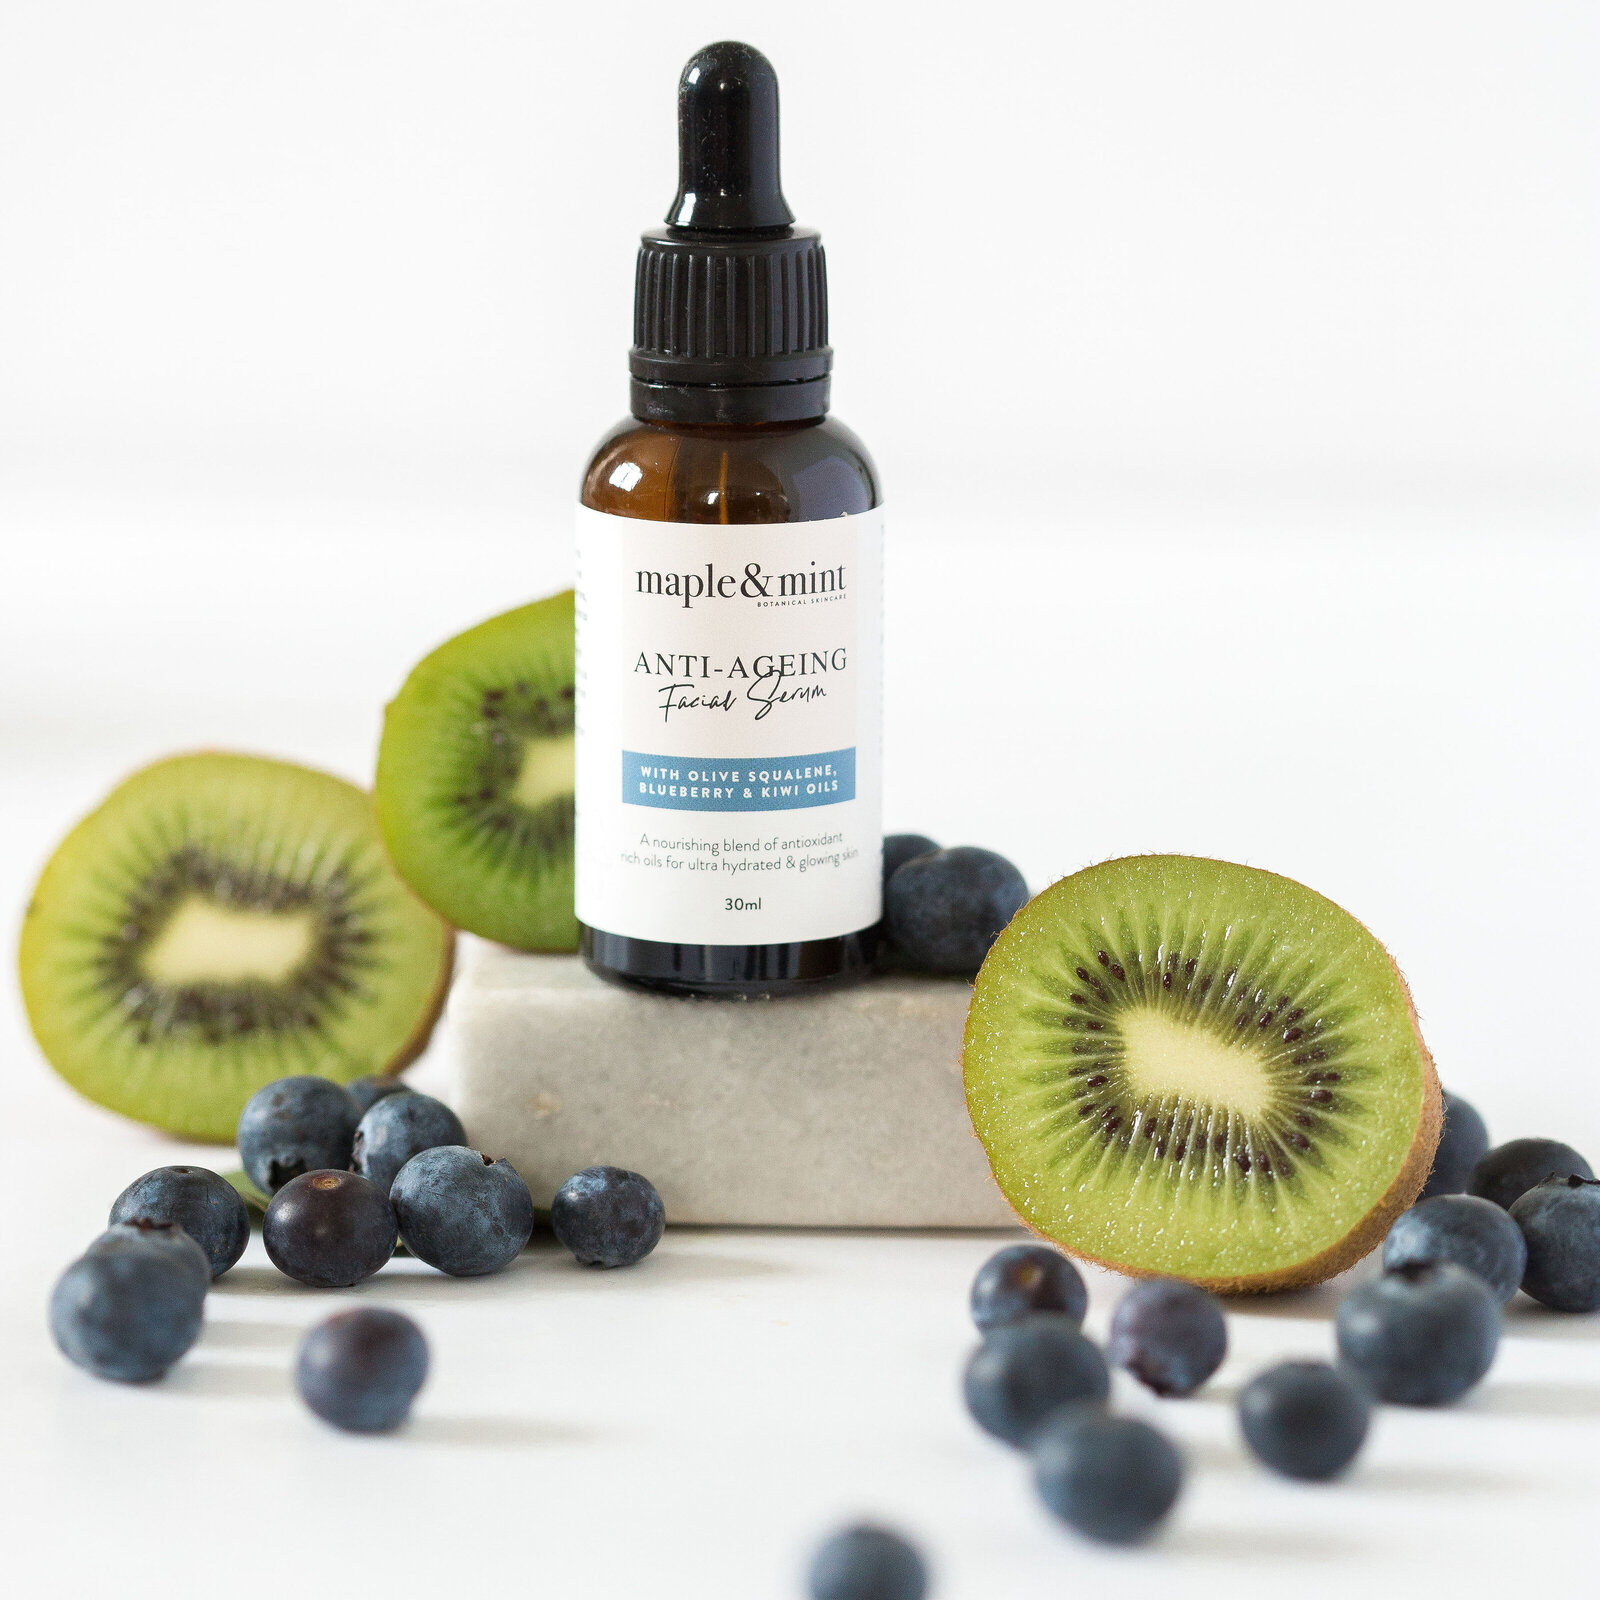 Small business branding product skincare photographer featuring natural ingredients of kiwi and blueberries for styled product photography by Chelsea Loren.